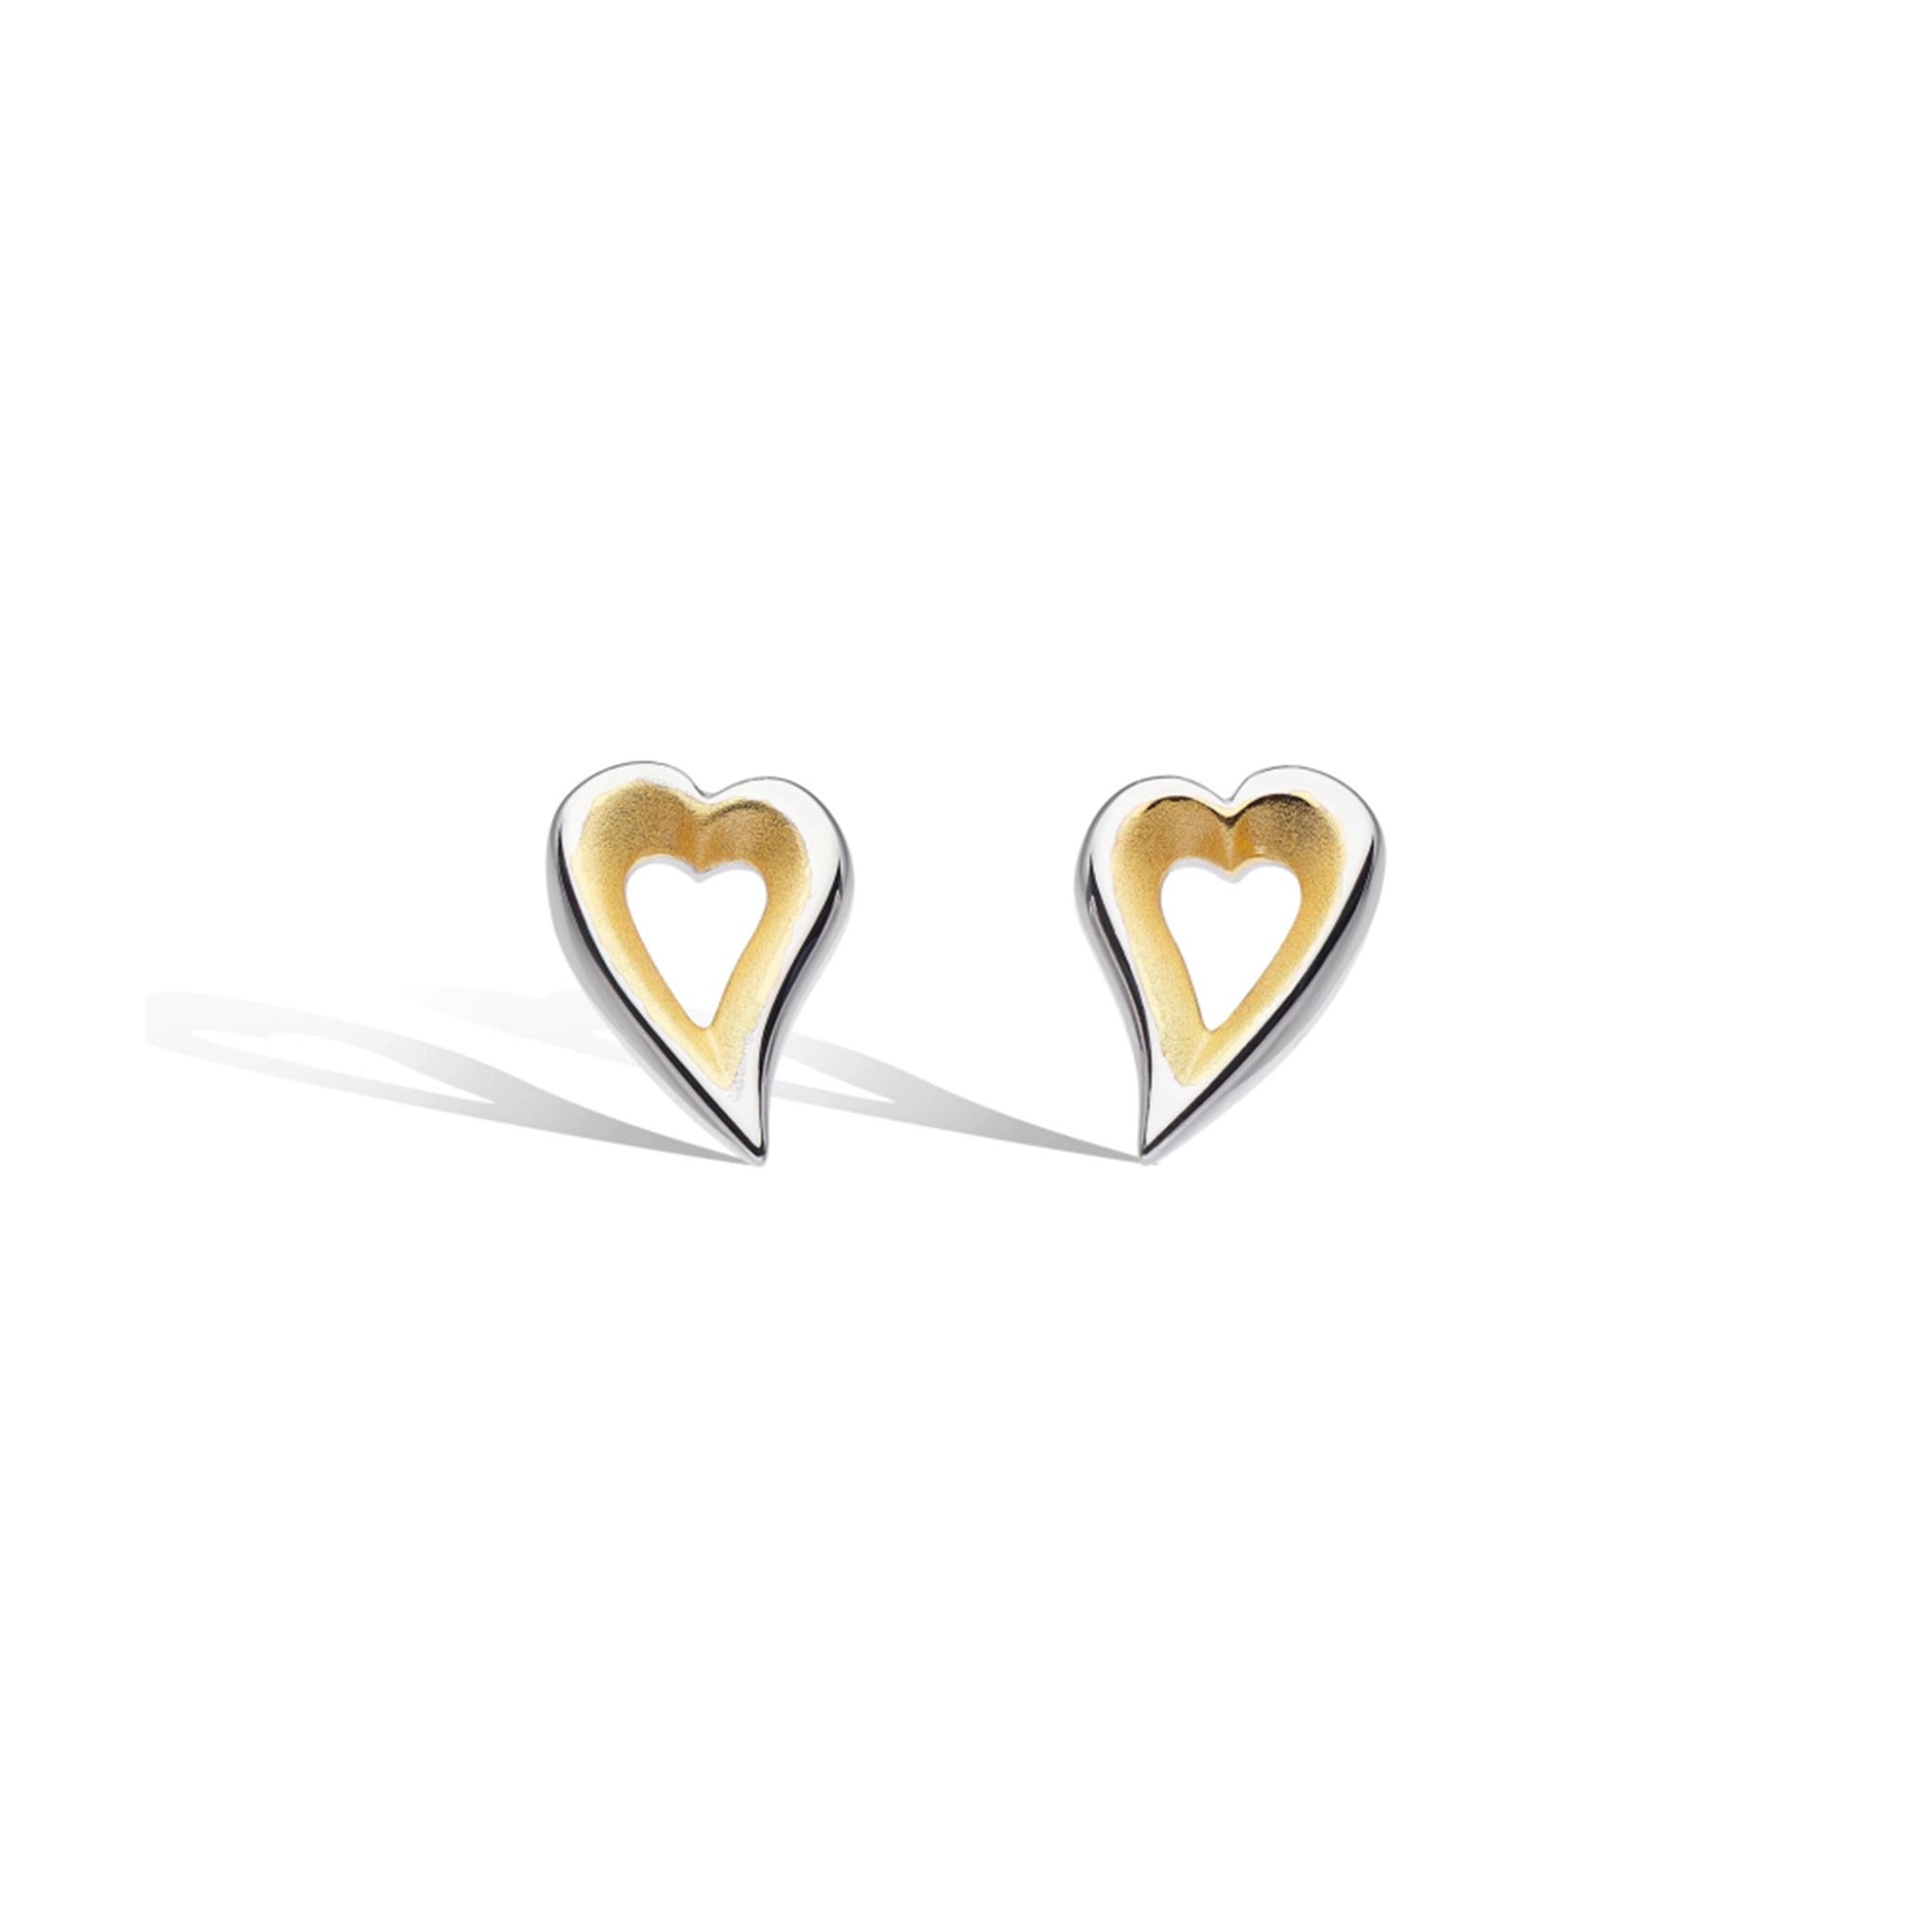 A pair of silver open heart shaped earrings with satin gold plated interior